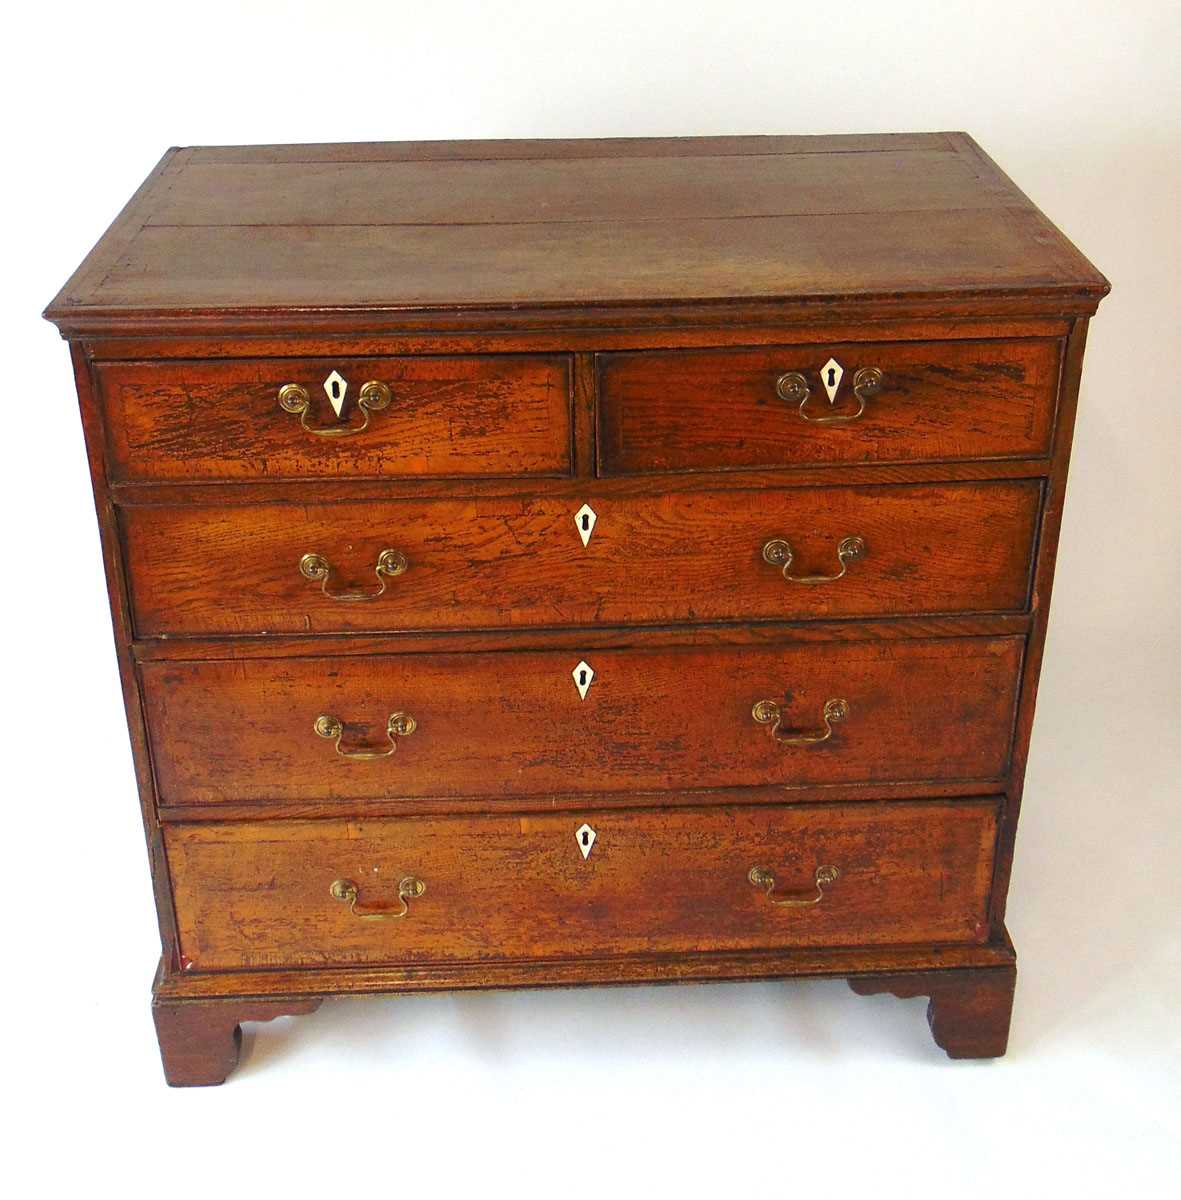 A mid 18th century oak chest of drawers, with crossbanded decoration and later bone escutcheons, - Image 3 of 13